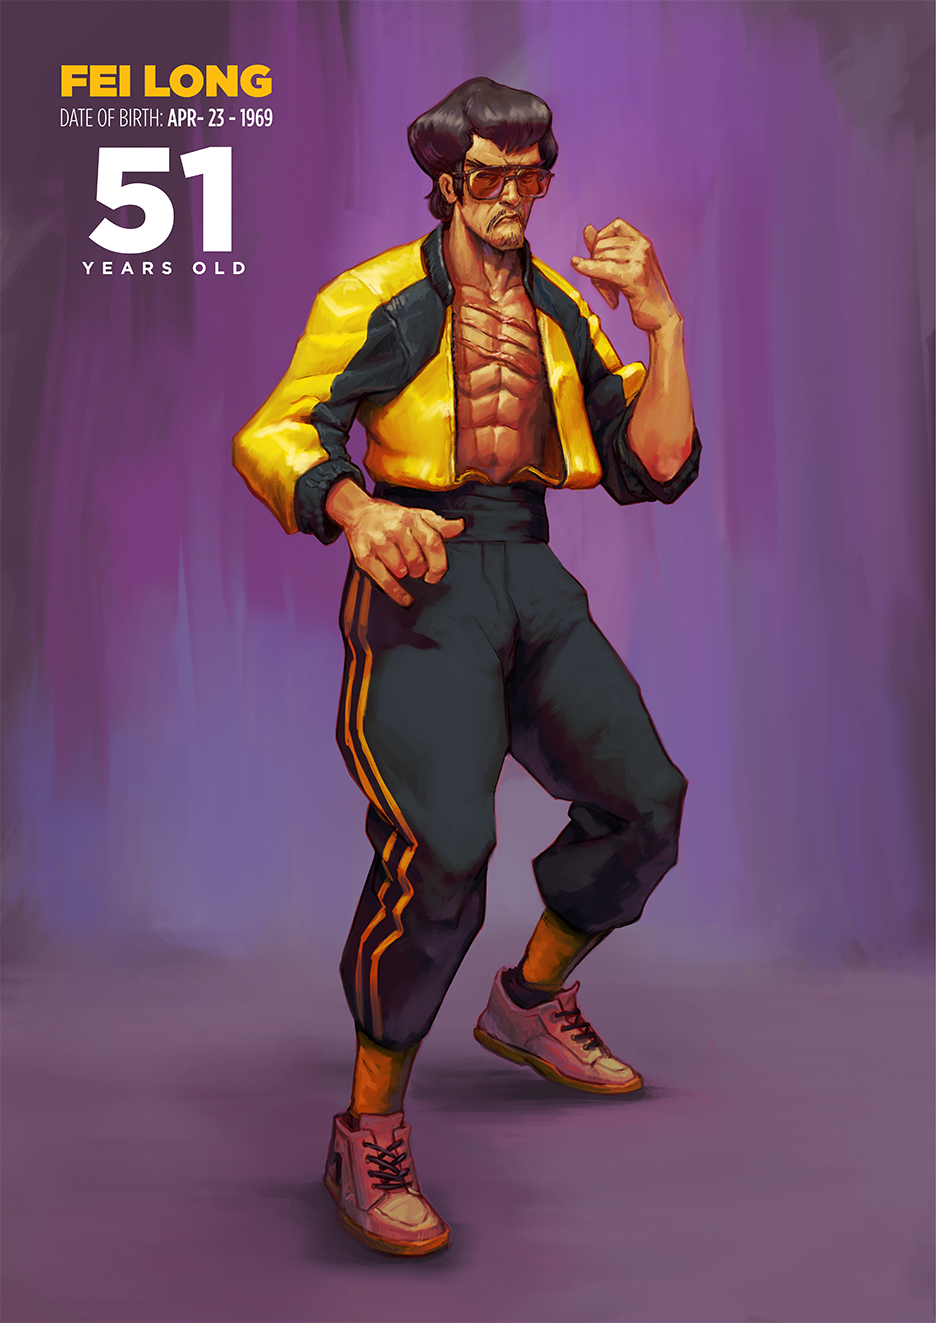 Diego Sanches - Street Fighters in 2020